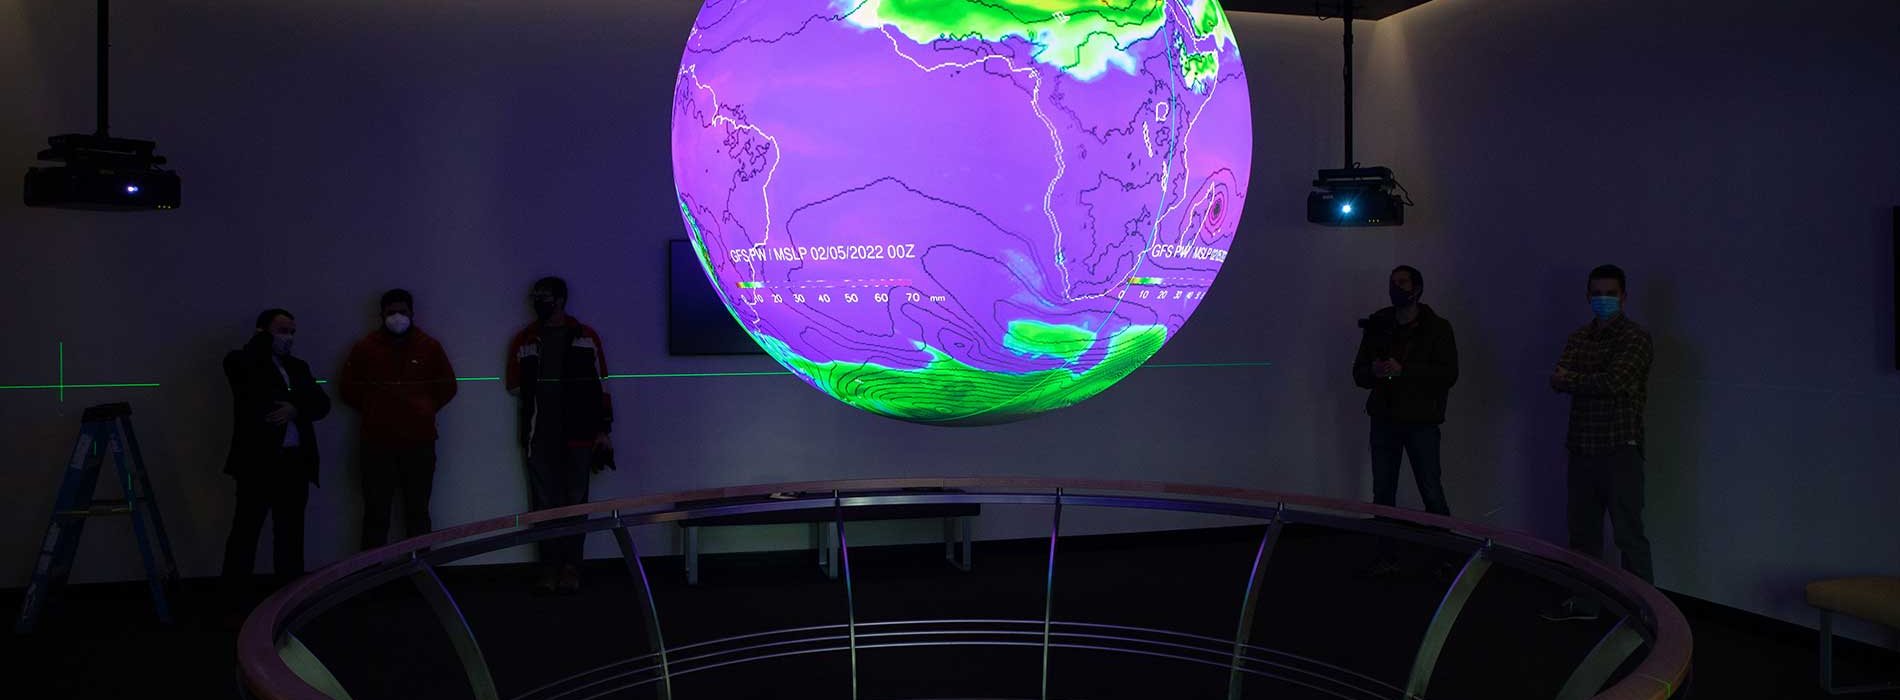 A colorful globe showing weather patterns is lit up inside the ETEC Map Room.